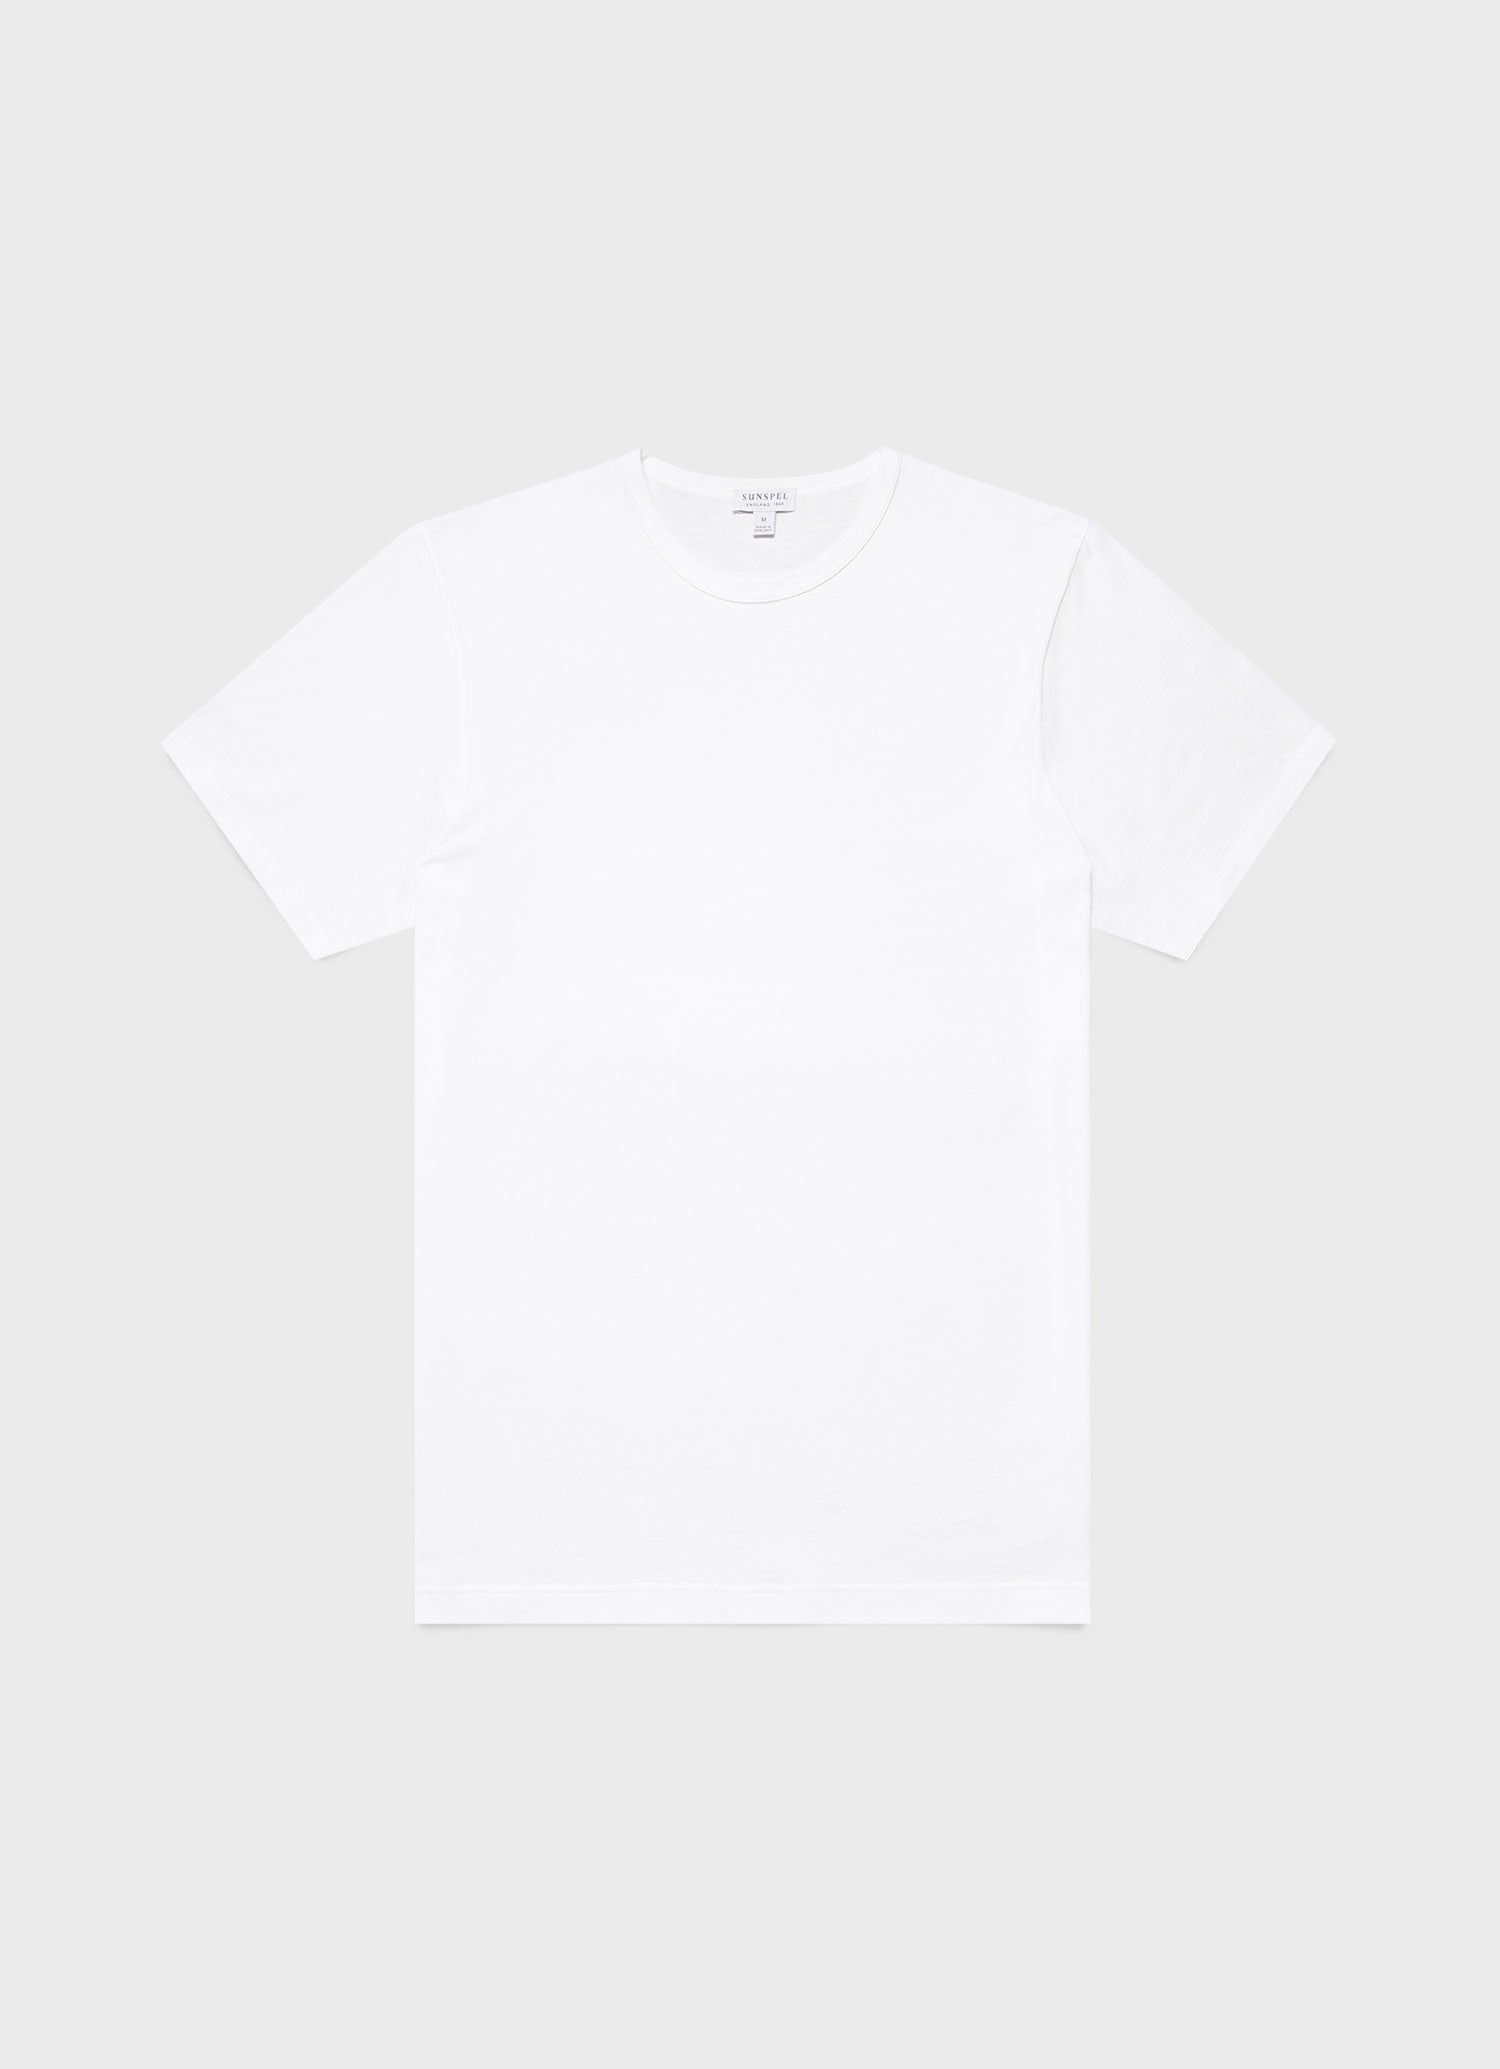 Classic Cotton T-shirt in White | Sunspel